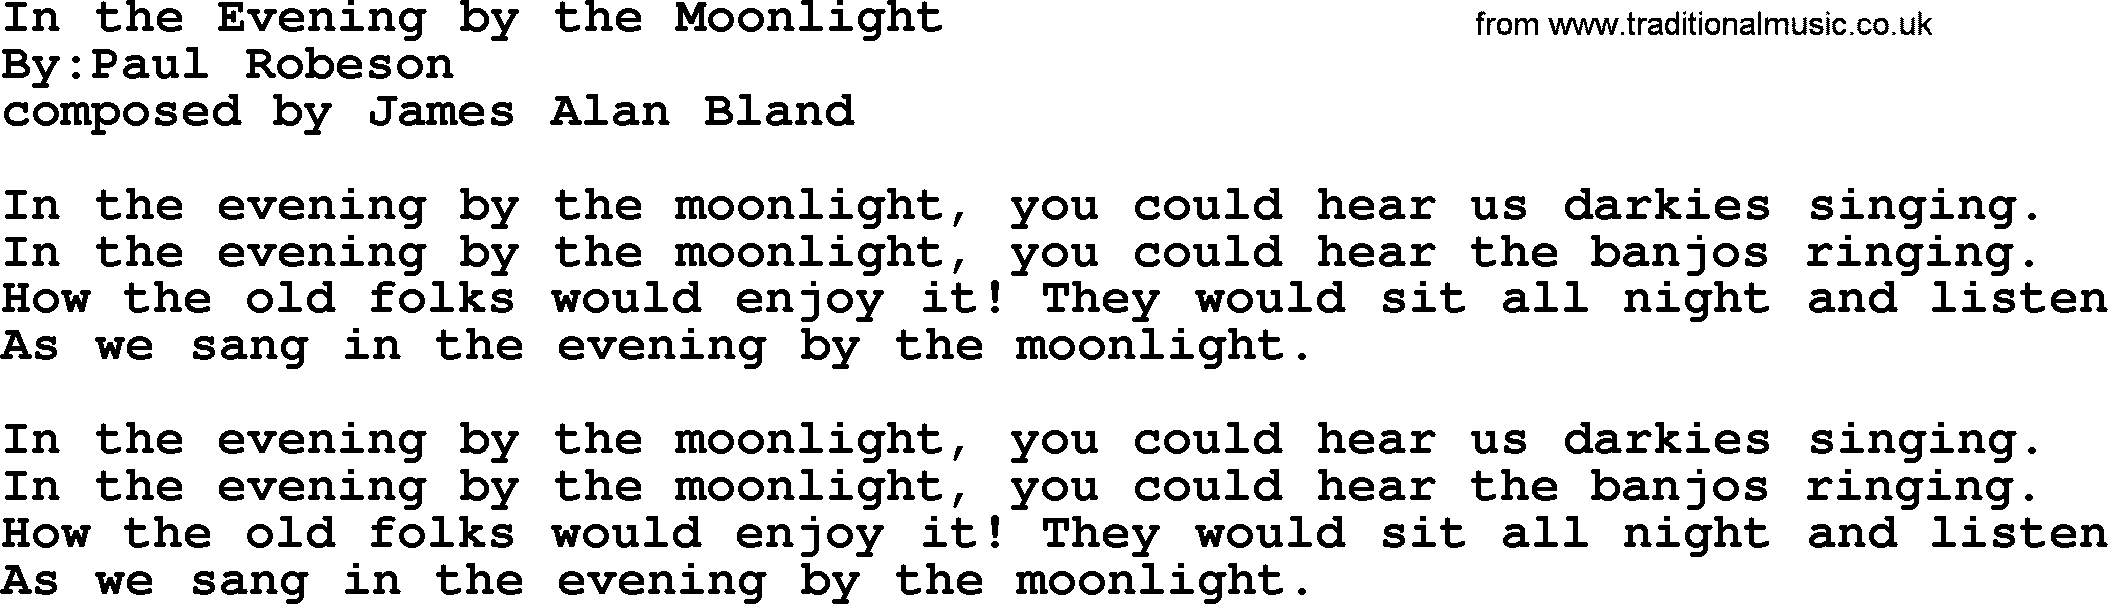 Political, Solidarity, Workers or Union song: In The Evening By The Moonlight, lyrics